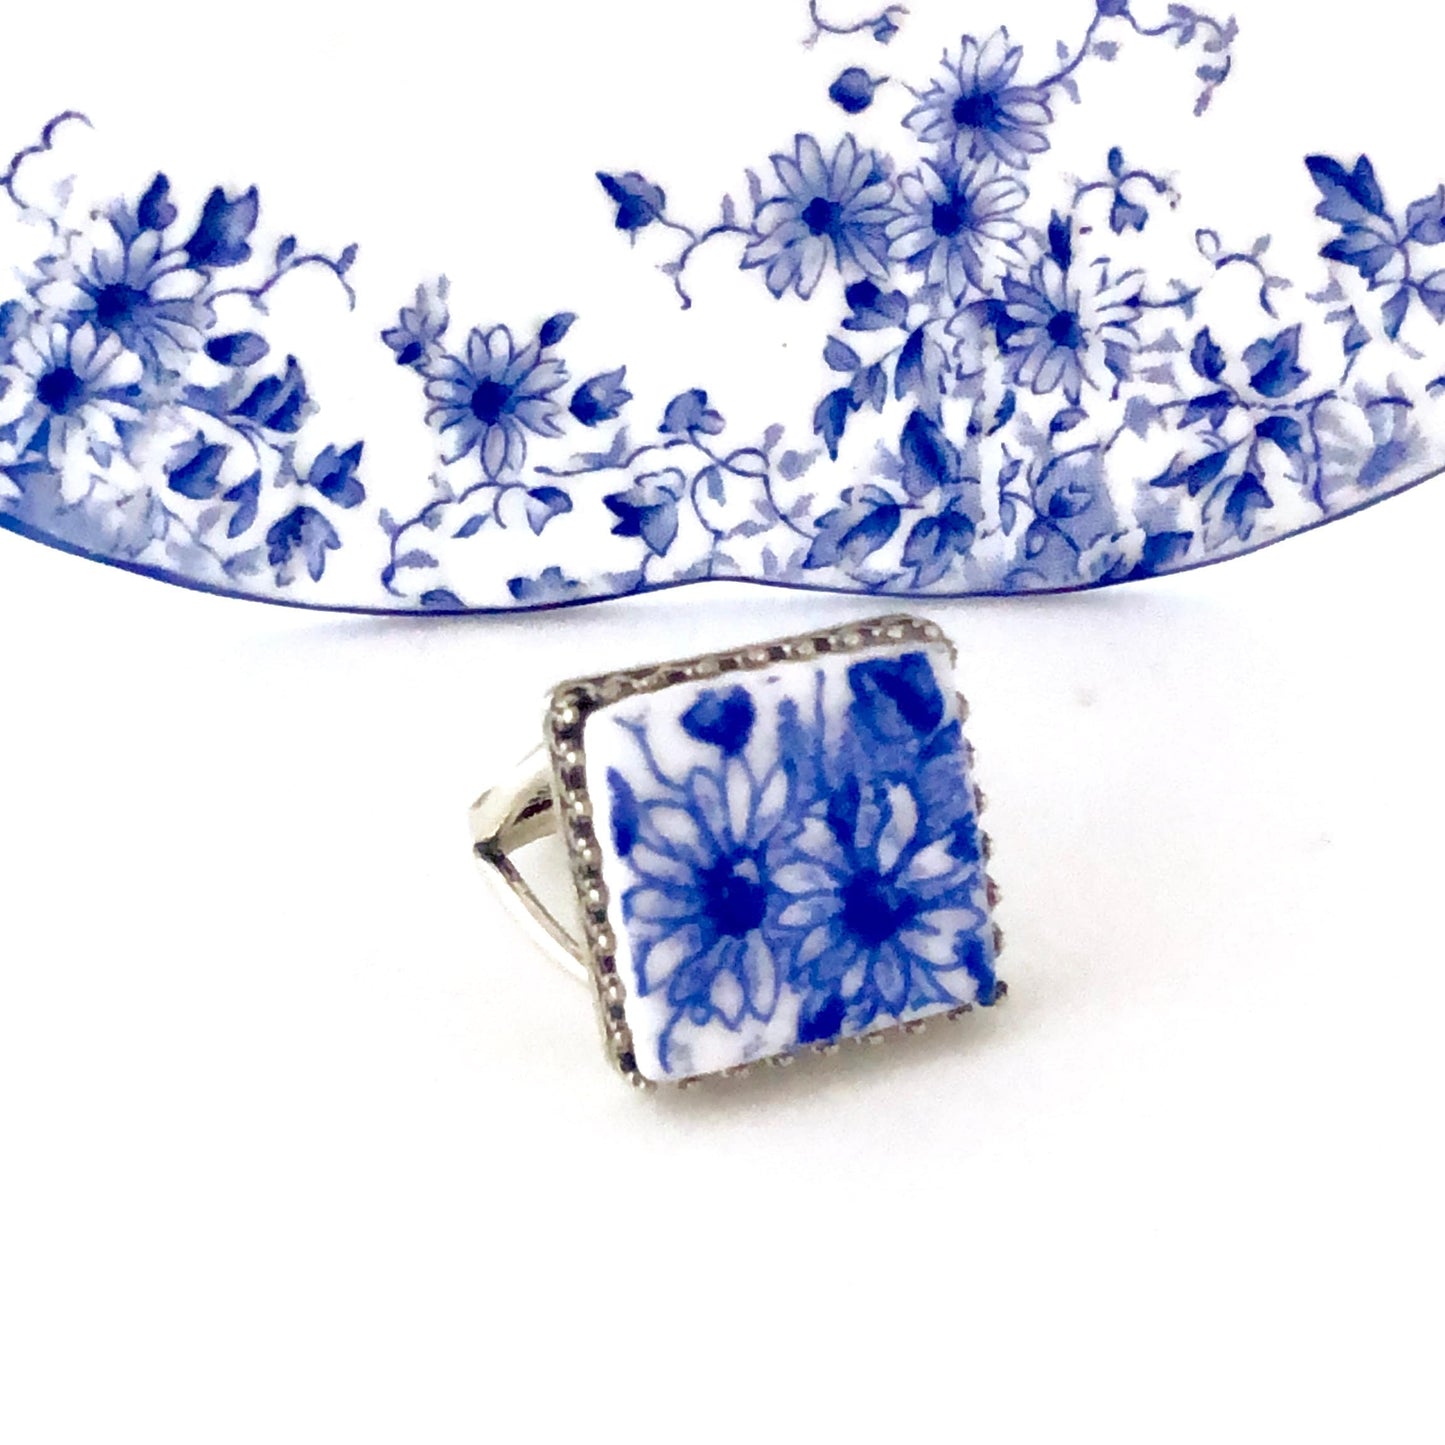 Antique Shelley Dainty Blue China, Broken China Jewelry Ring, Sterling Silver Rings for Women, Unique Gifts for Women